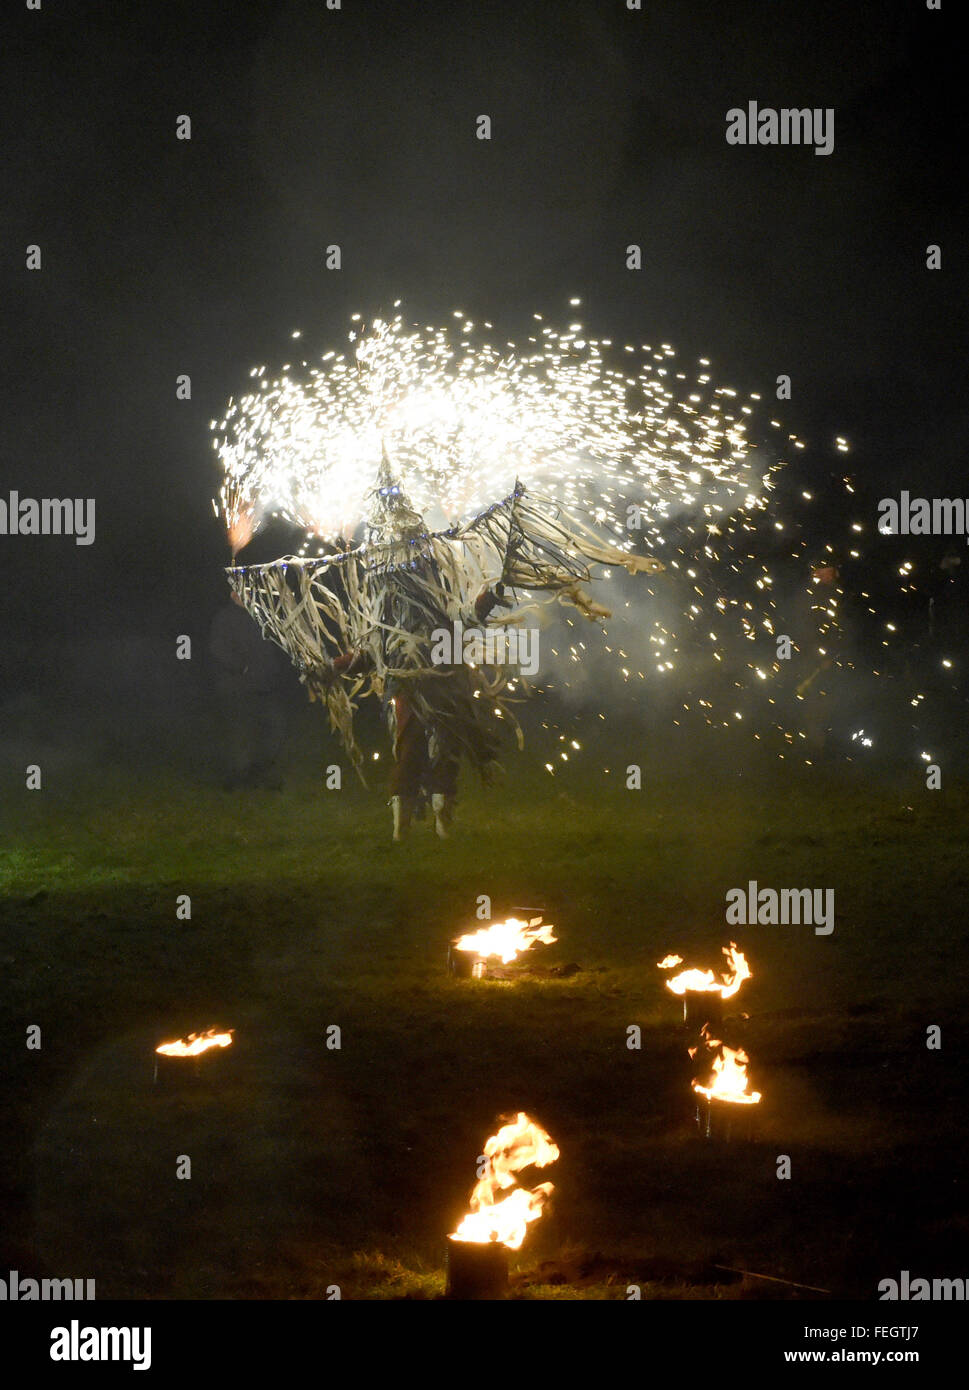 Marsden Imbolc Fire Festival. The festival celebrates the end of winter and coming of spring. Stock Photo